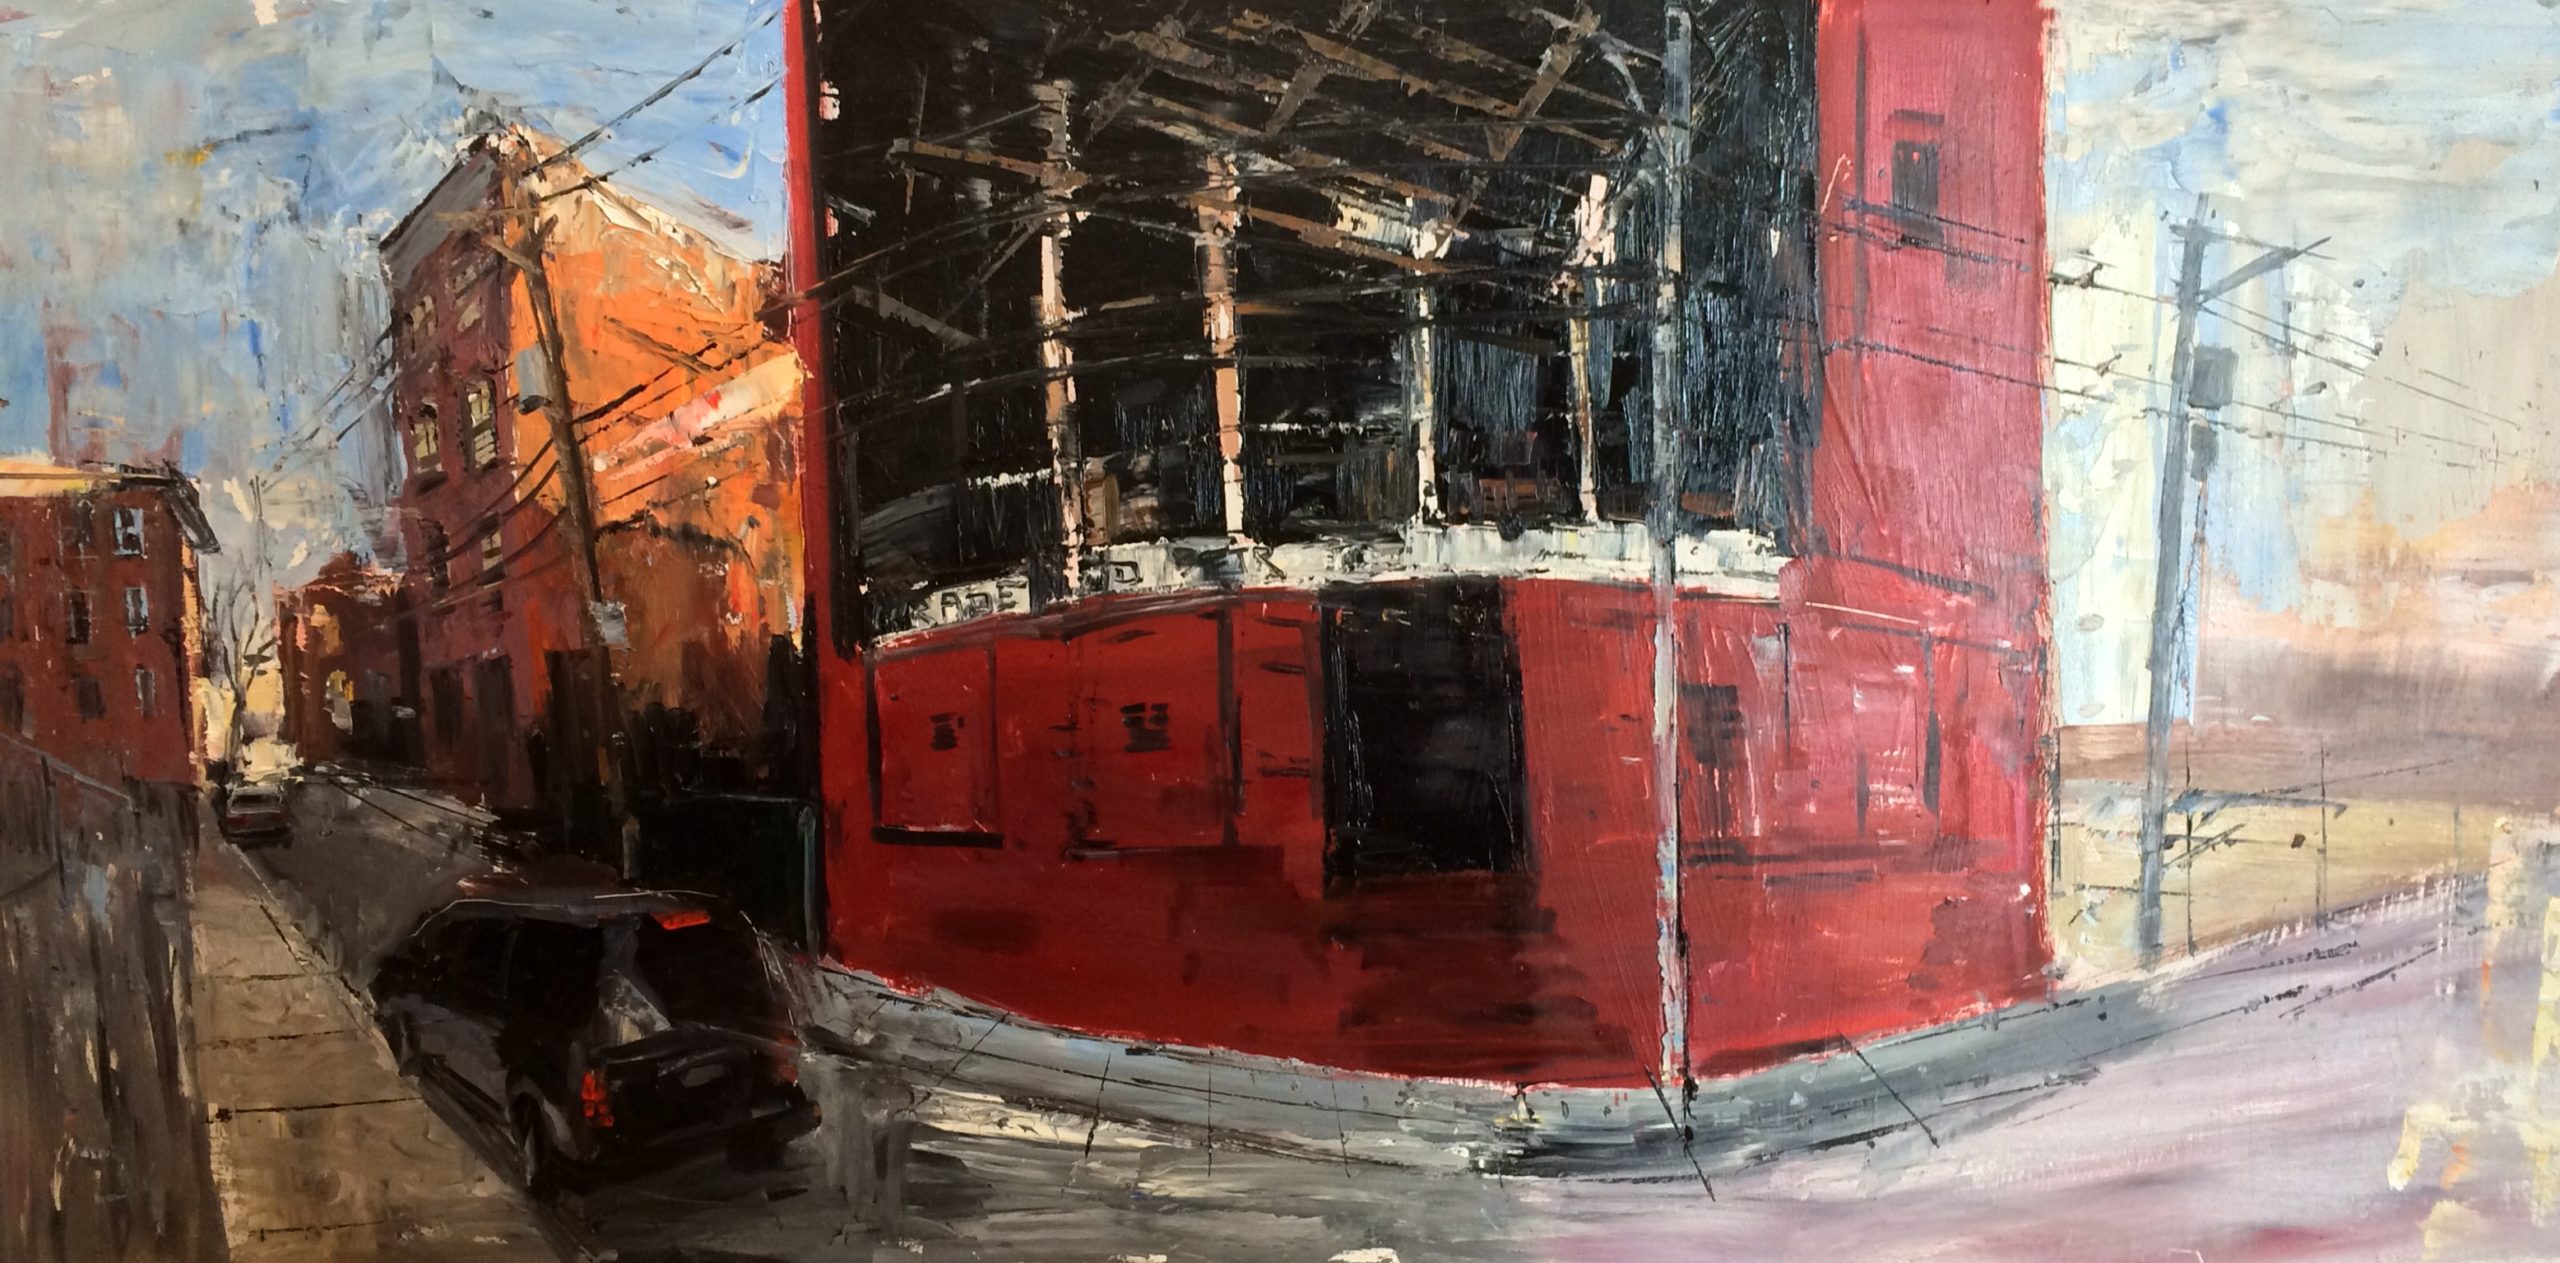 Gregory Prestegord, "Broken Down Brewery," 24 x 48 inches, Oil on panel